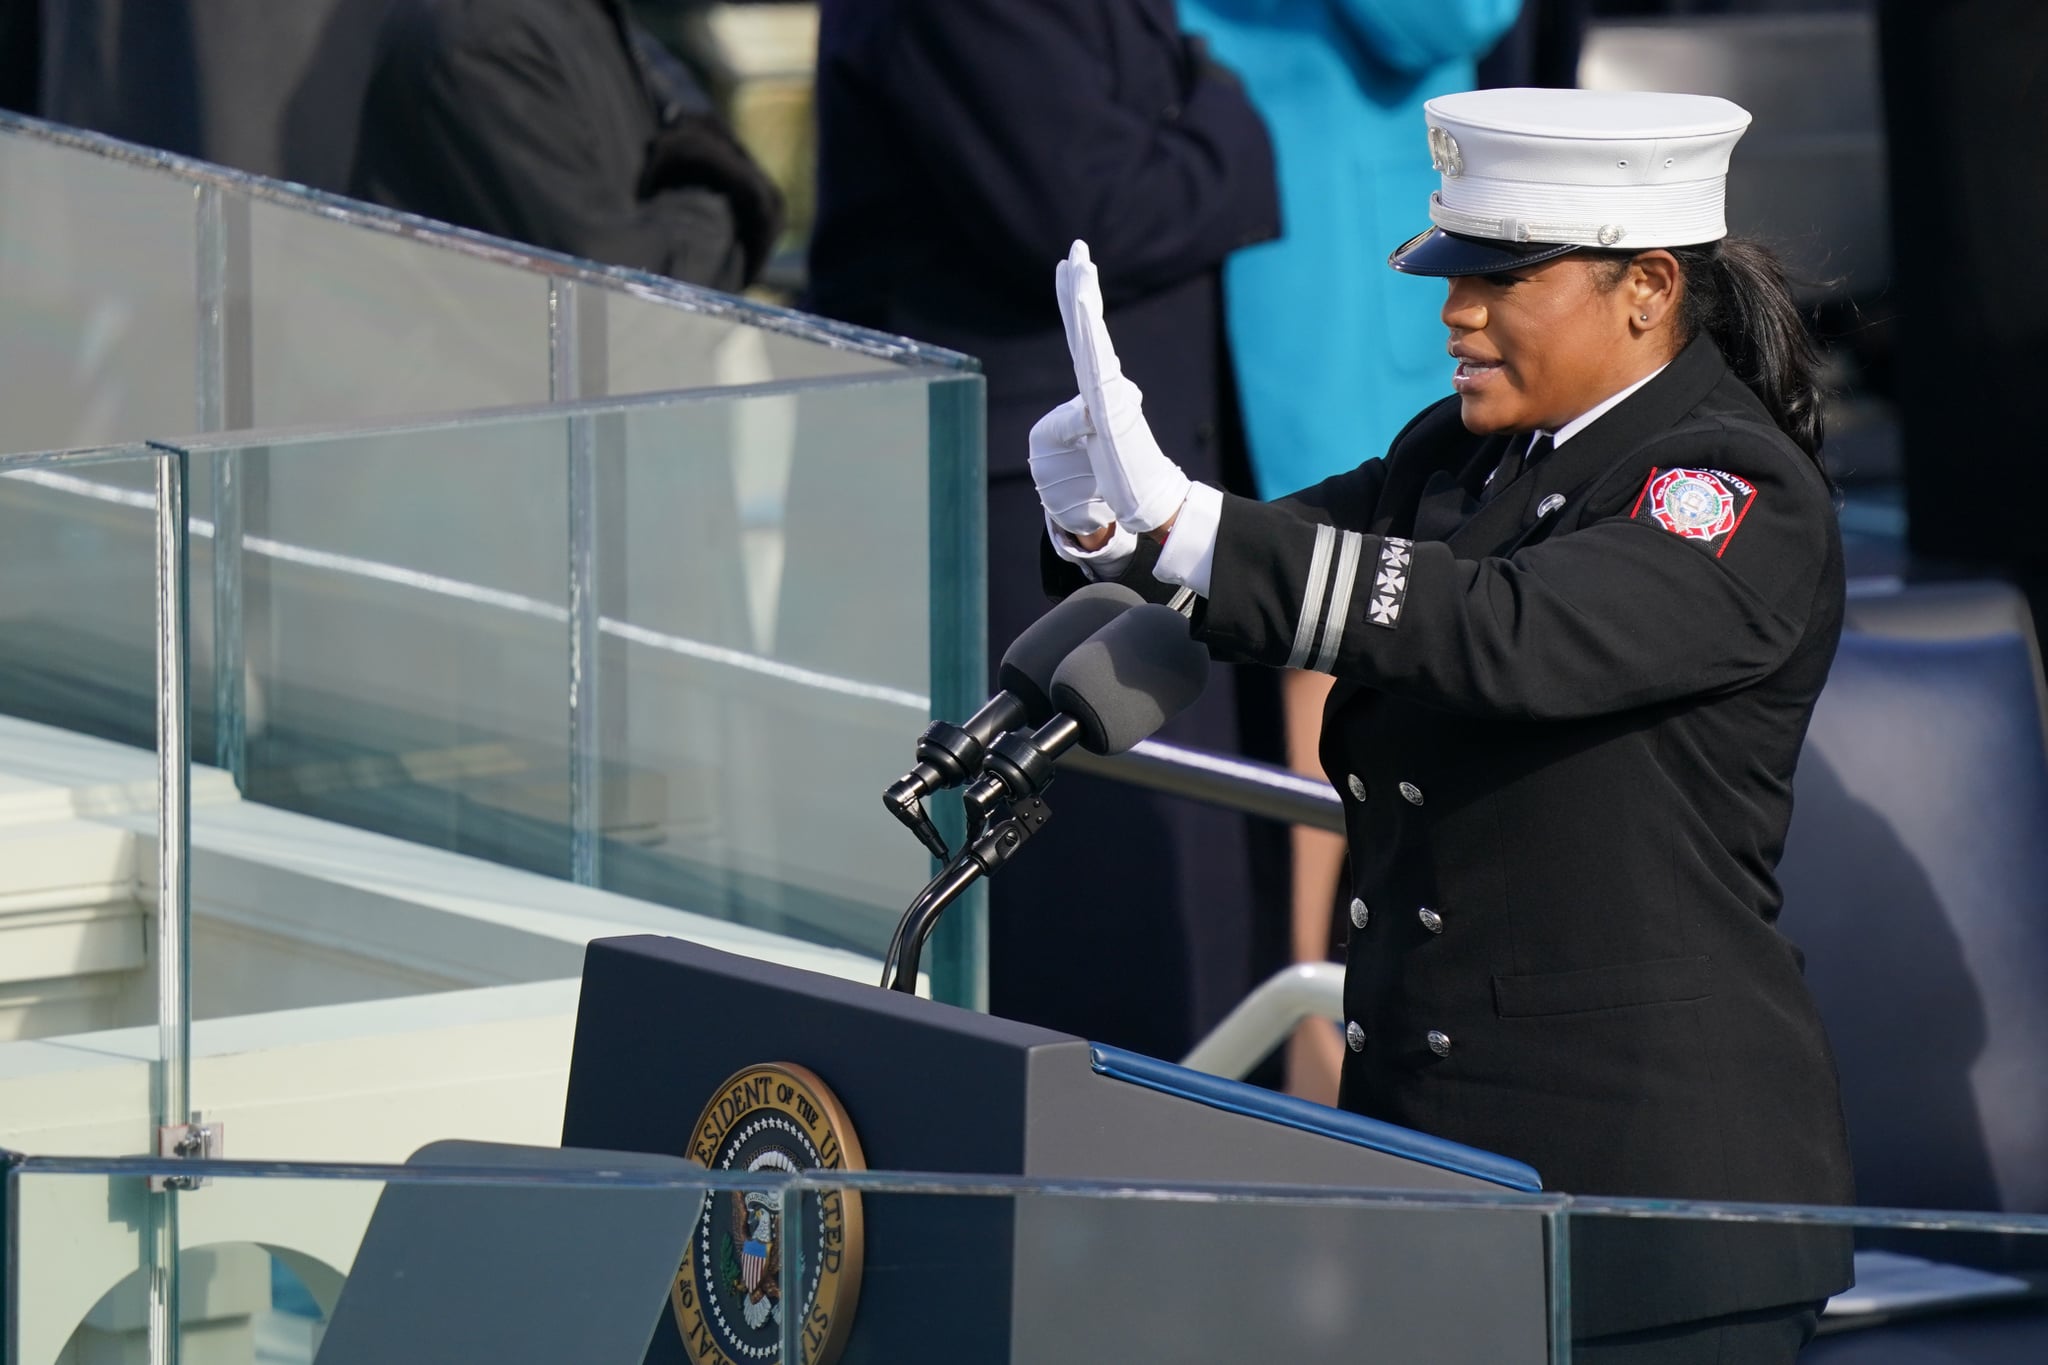 WASHINGTON, DC - JANUARY 20: Capt. Andrea Hall delivers the pledge of allegiance during the inauguration of U.S. President-elect Joe Biden on the West Front of the U.S. Capitol on January 20, 2021 in Washington, DC.  During today's inauguration ceremony Joe Biden becomes the 46th president of the United States. (Photo by Erin Schaff-Pool/Getty Images)